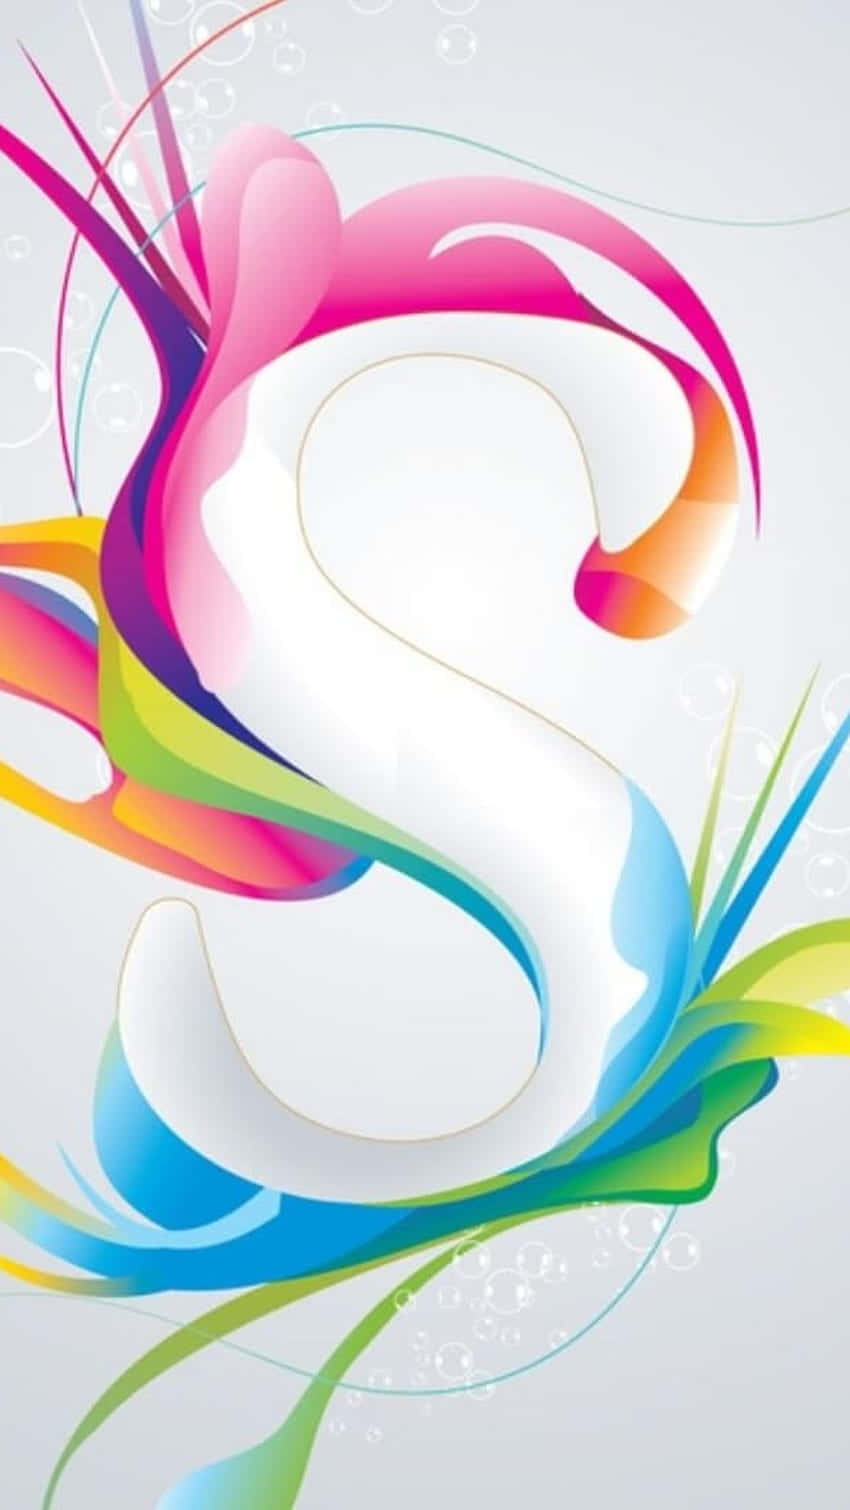 A Colorful Letter S With Swirls And Swirls